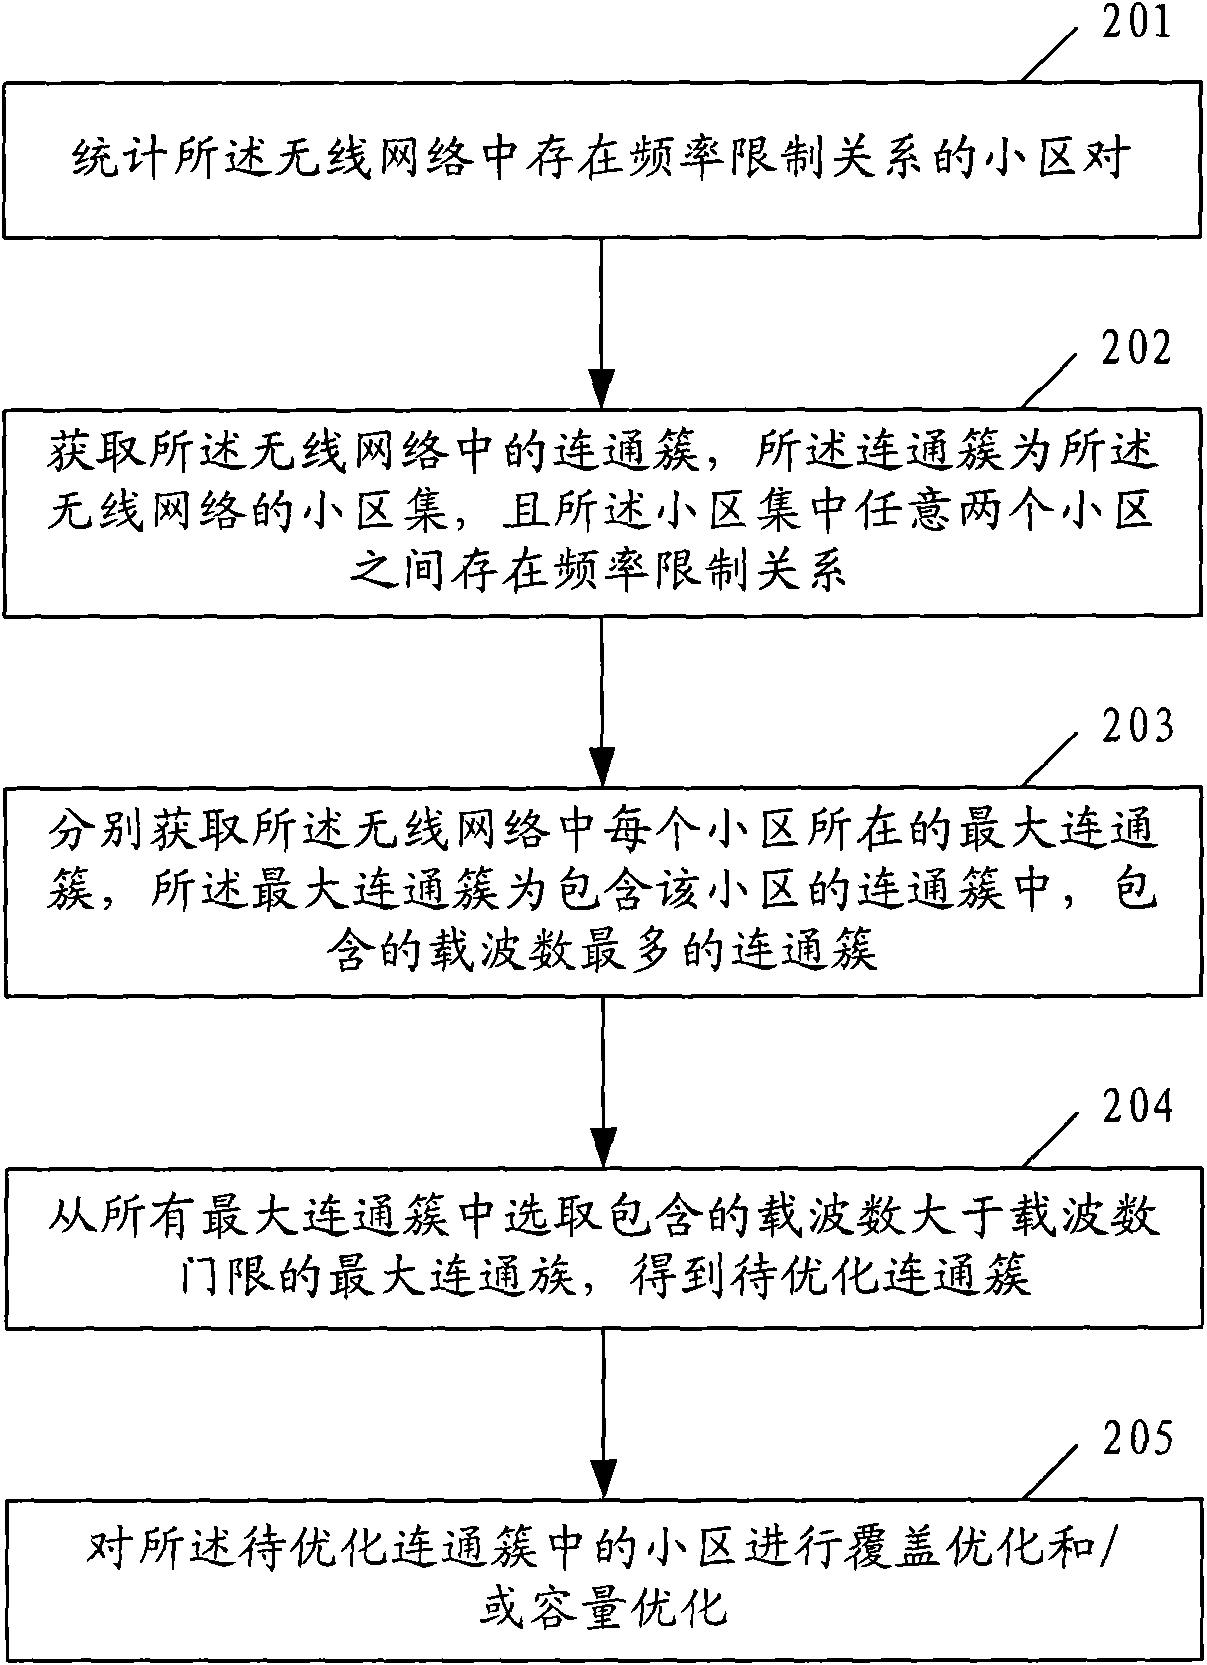 Method and system for optimizing wireless network